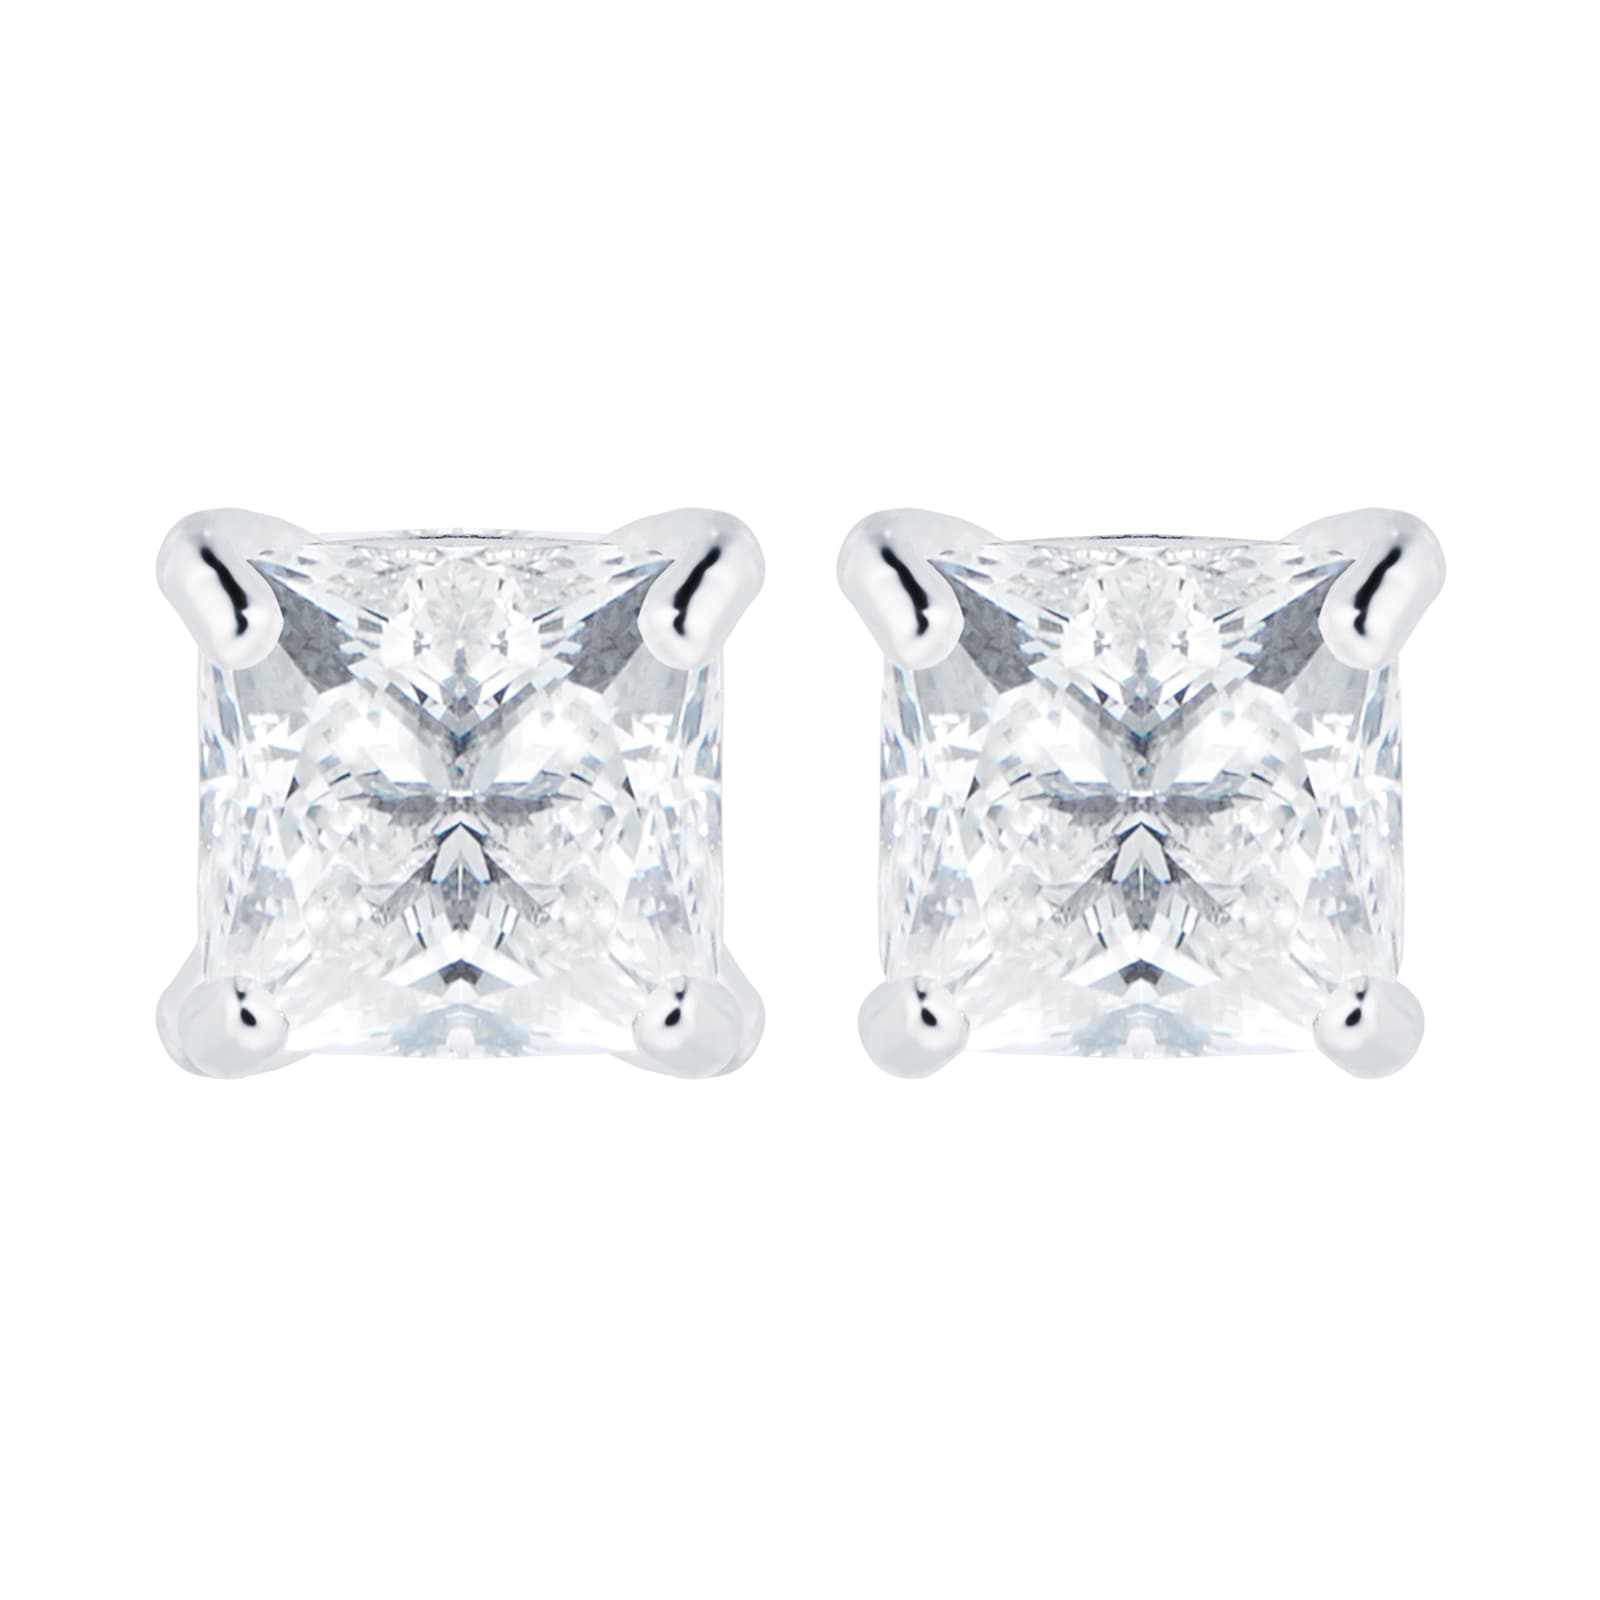 Sterling Silver 5mm Square Cubic Zirconia Stud Earrings